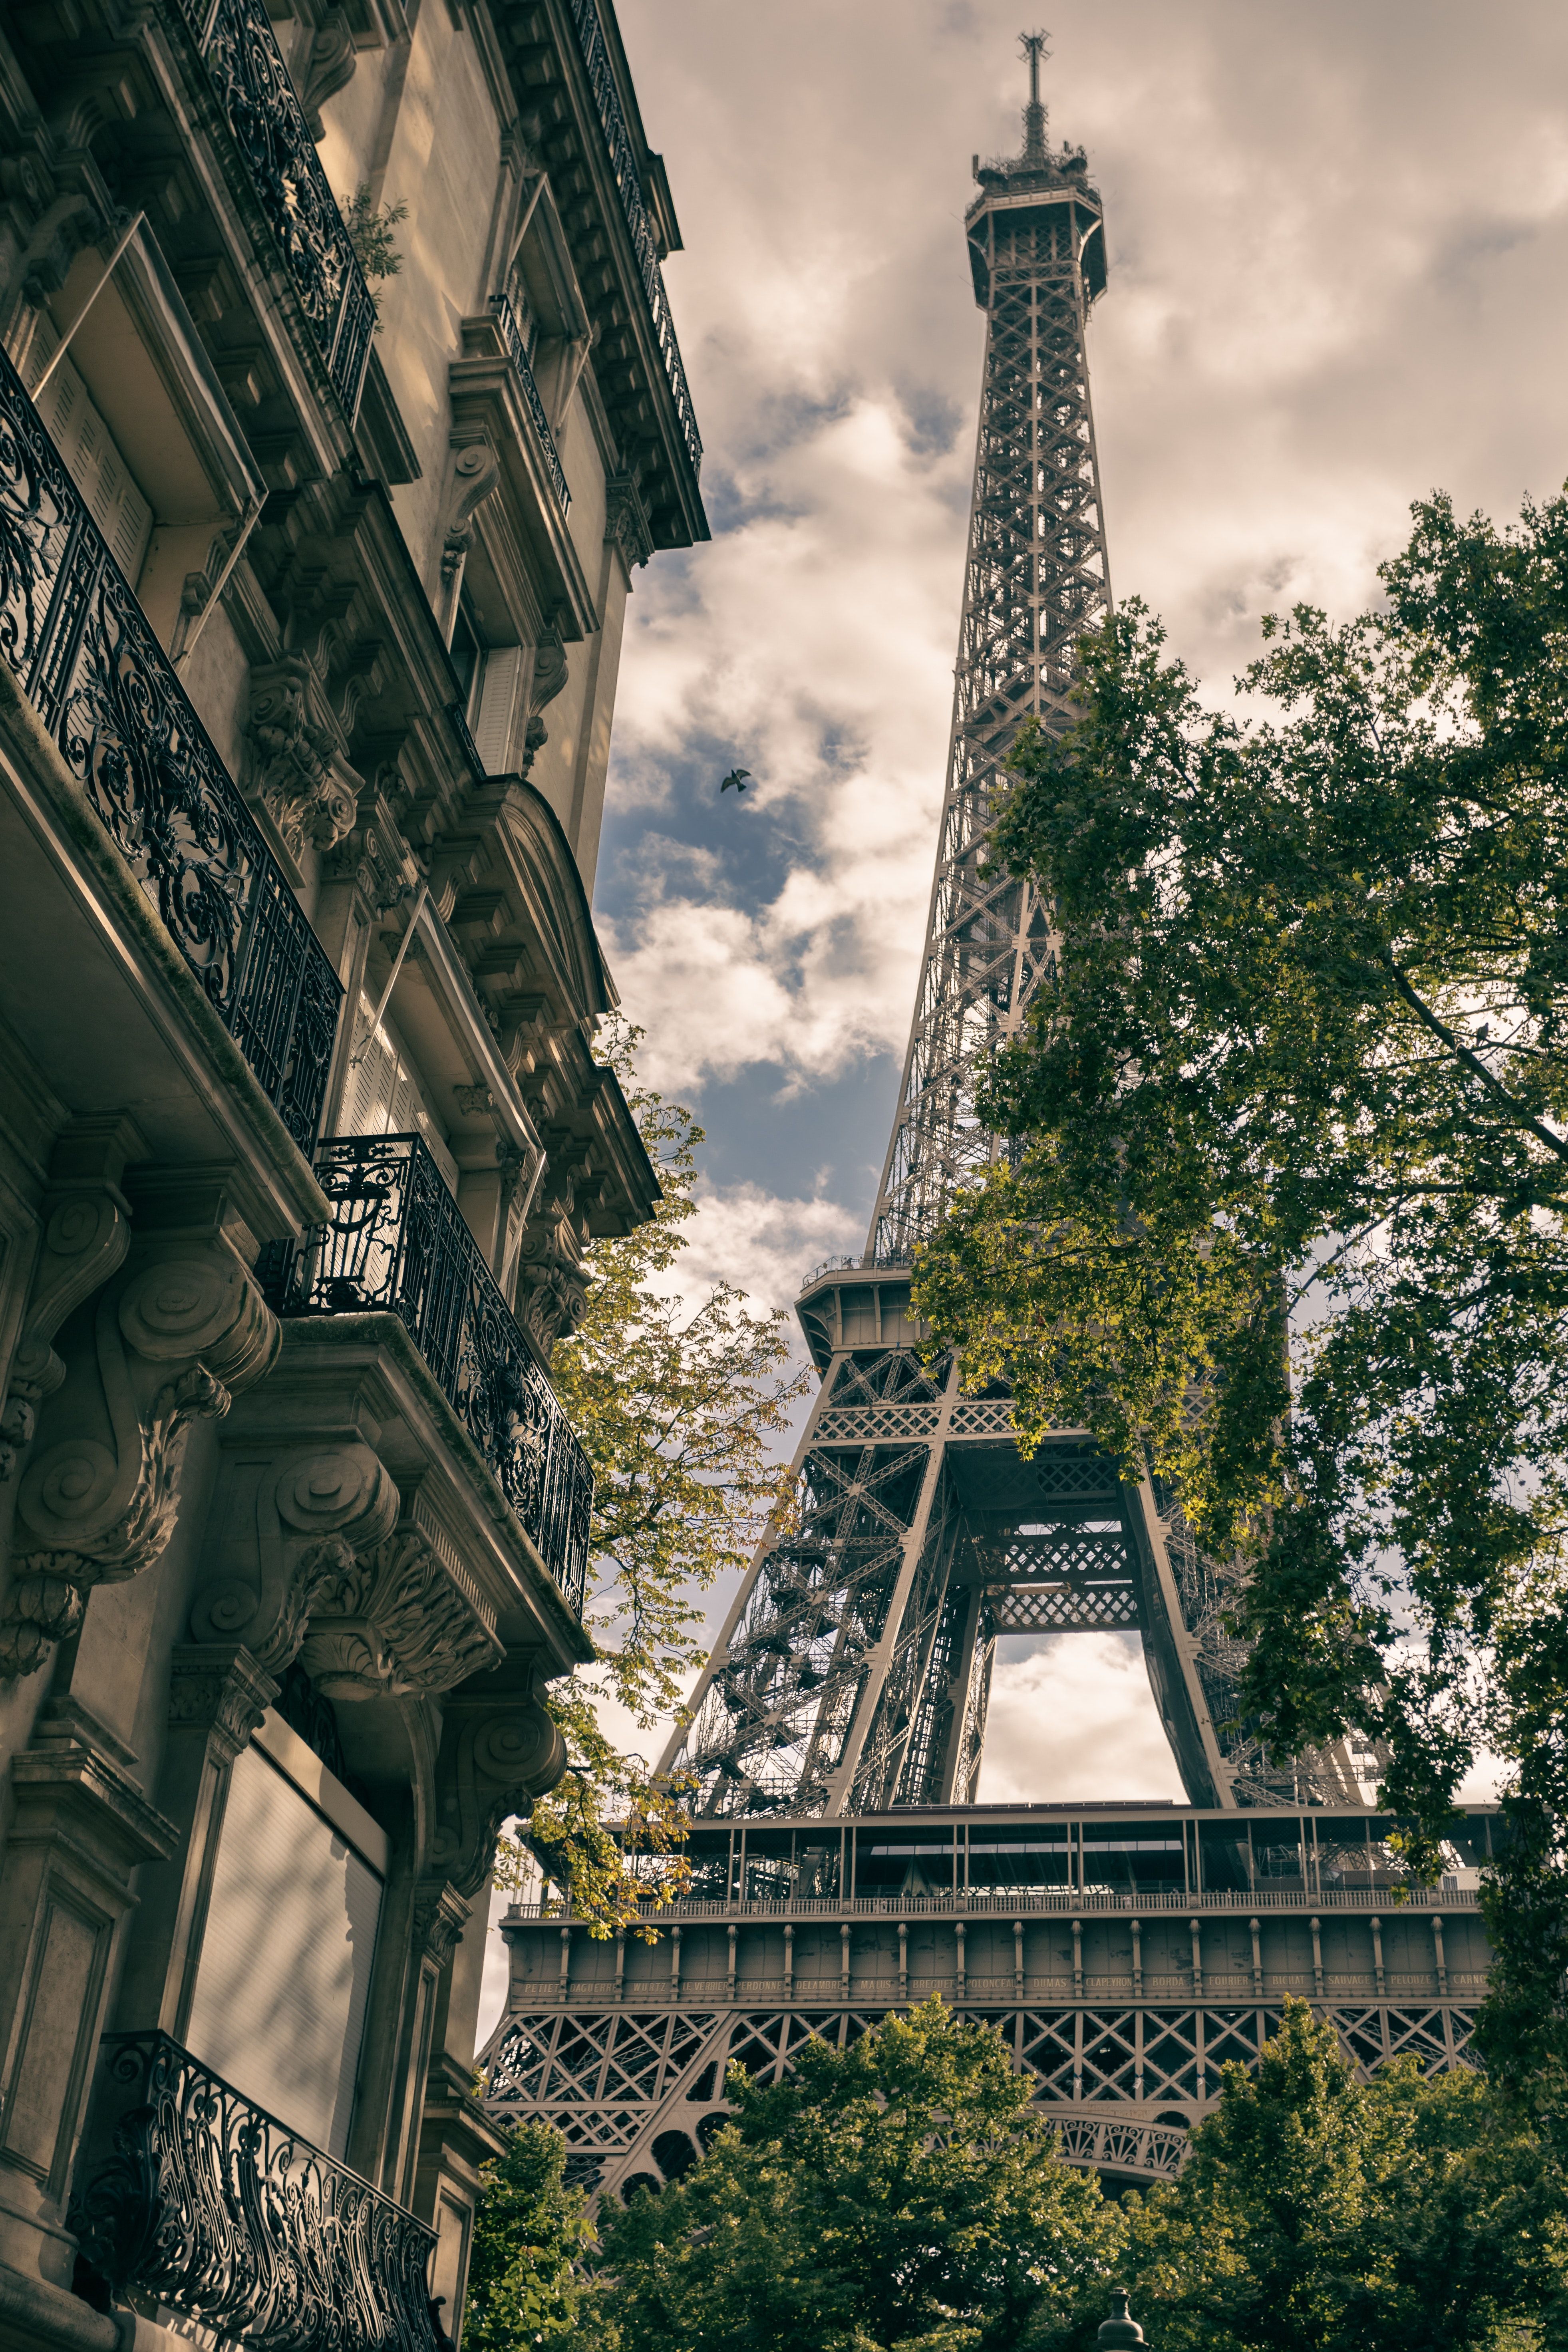 A tall building with trees and buildings in the background - Eiffel Tower